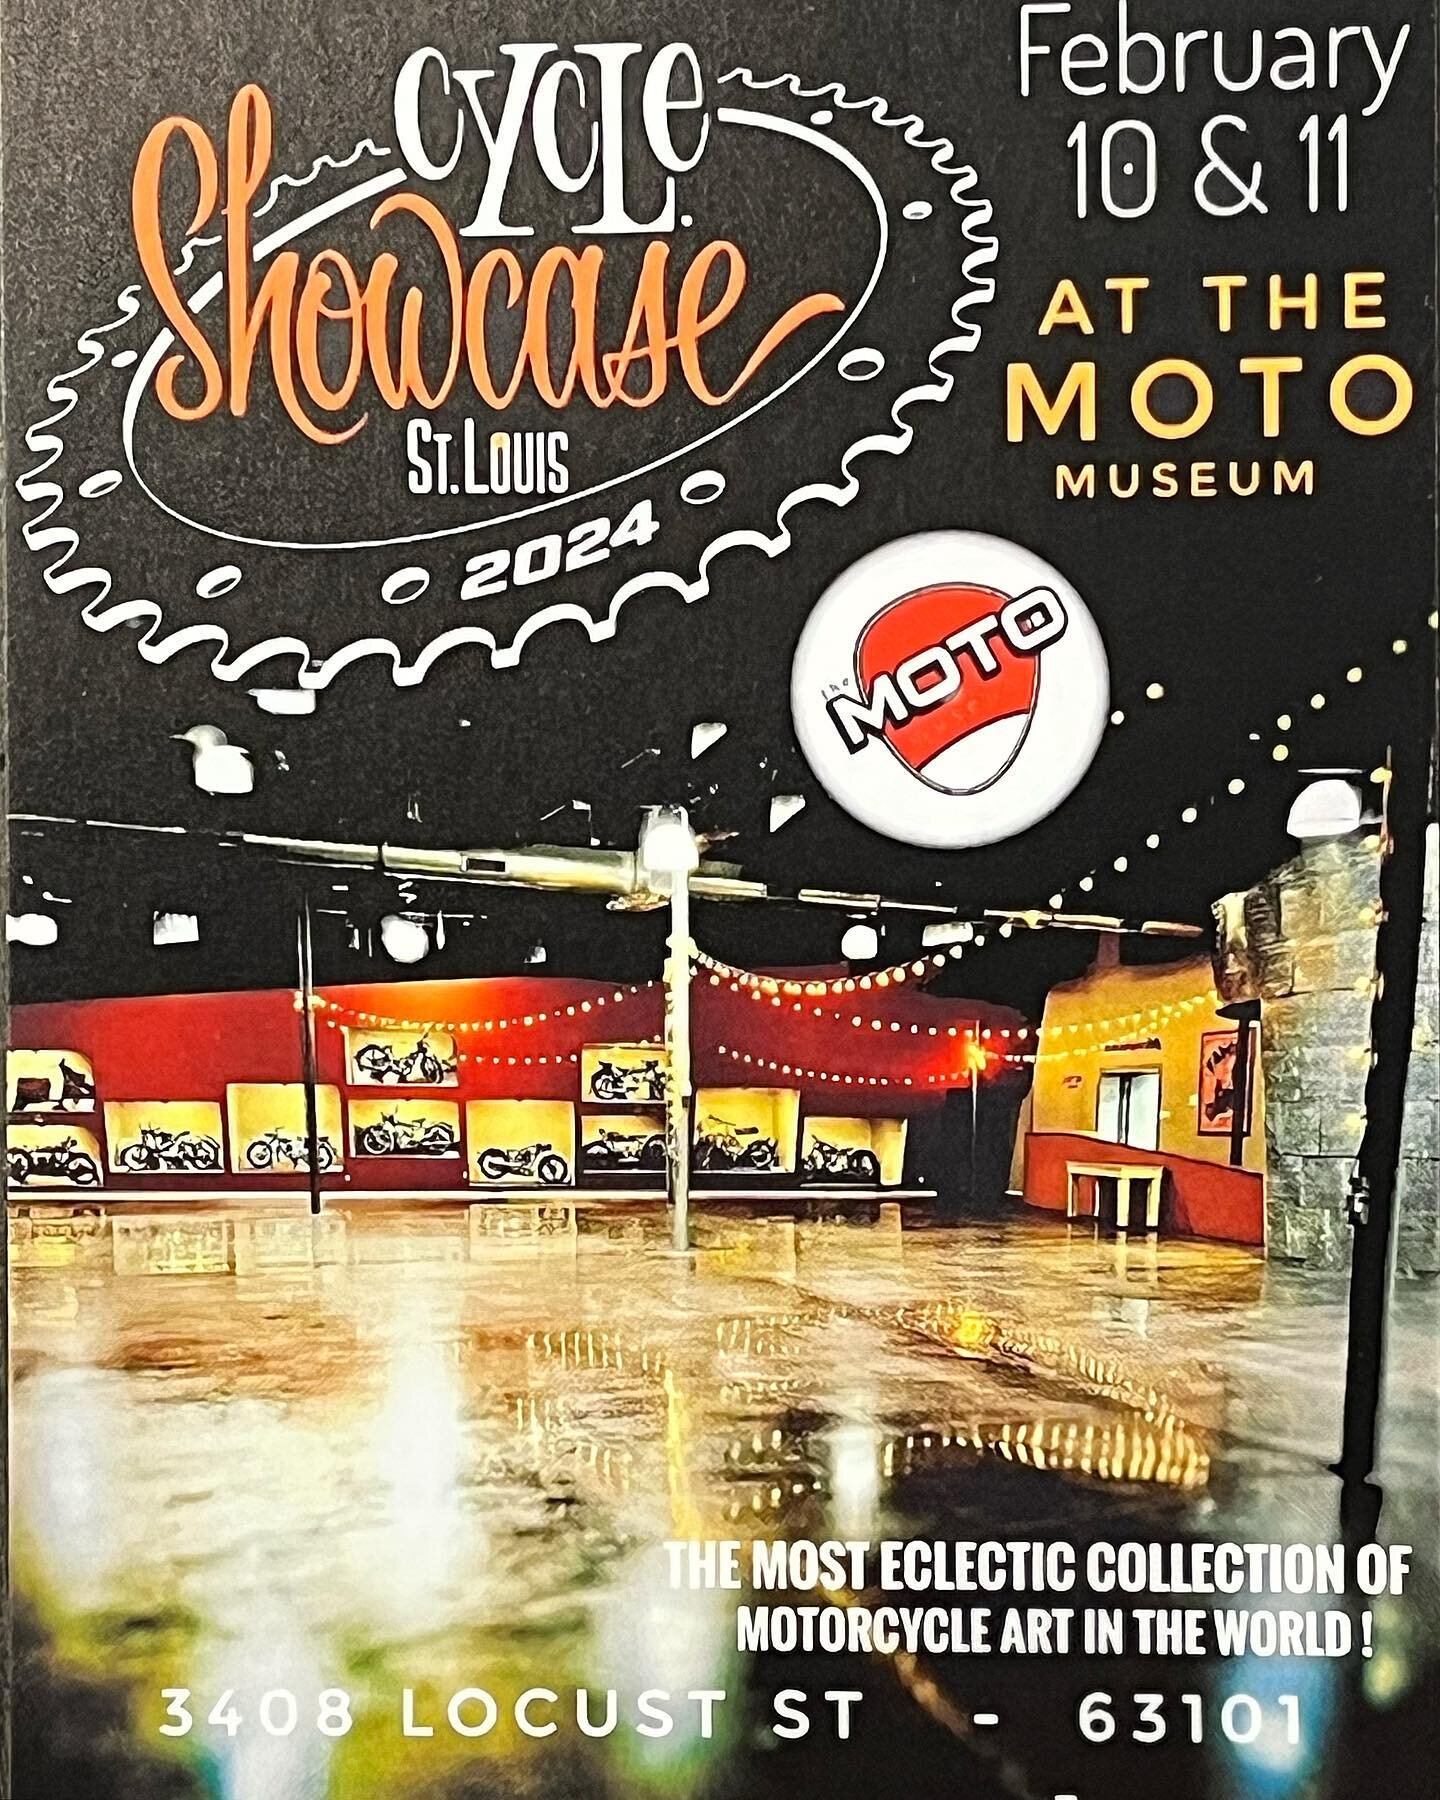 We are honored to be a part of this amazing event once again. Art exhibits and the most jaw dropping bike builds on earth. You don&rsquo;t want to miss this.
Saturday February 10th 11-7 Sunday February 11th 11-4 @themotomuseum -
-
@cyclesourcemagazin